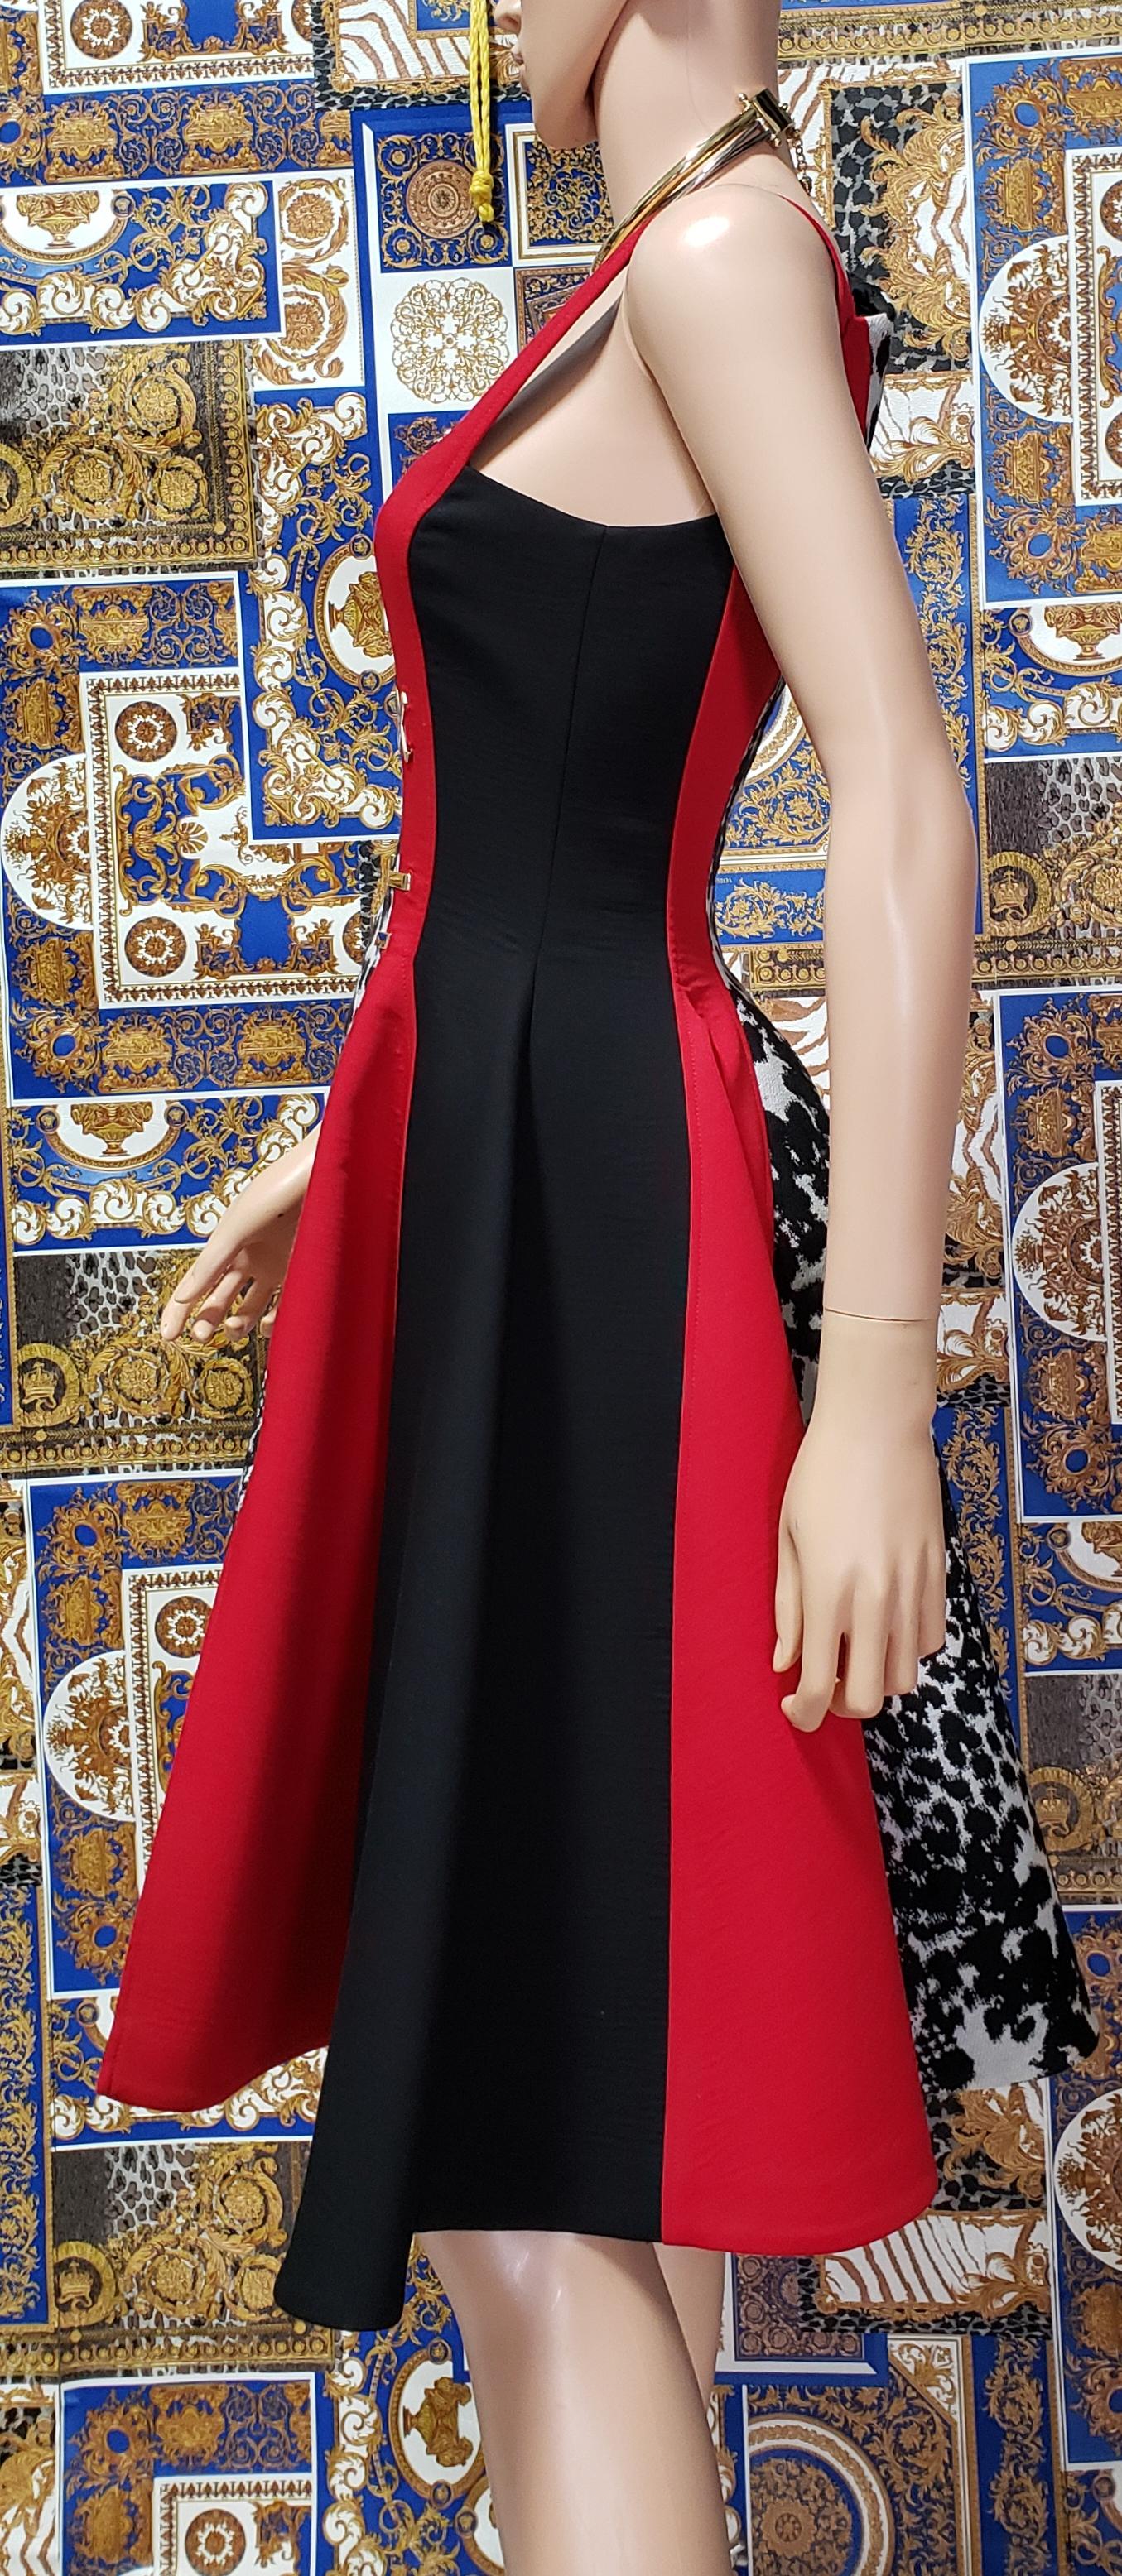 Women's Pre/Fall 2015 NEW VERSACE COLOR-BLOCK DRESS 38 - 4 For Sale